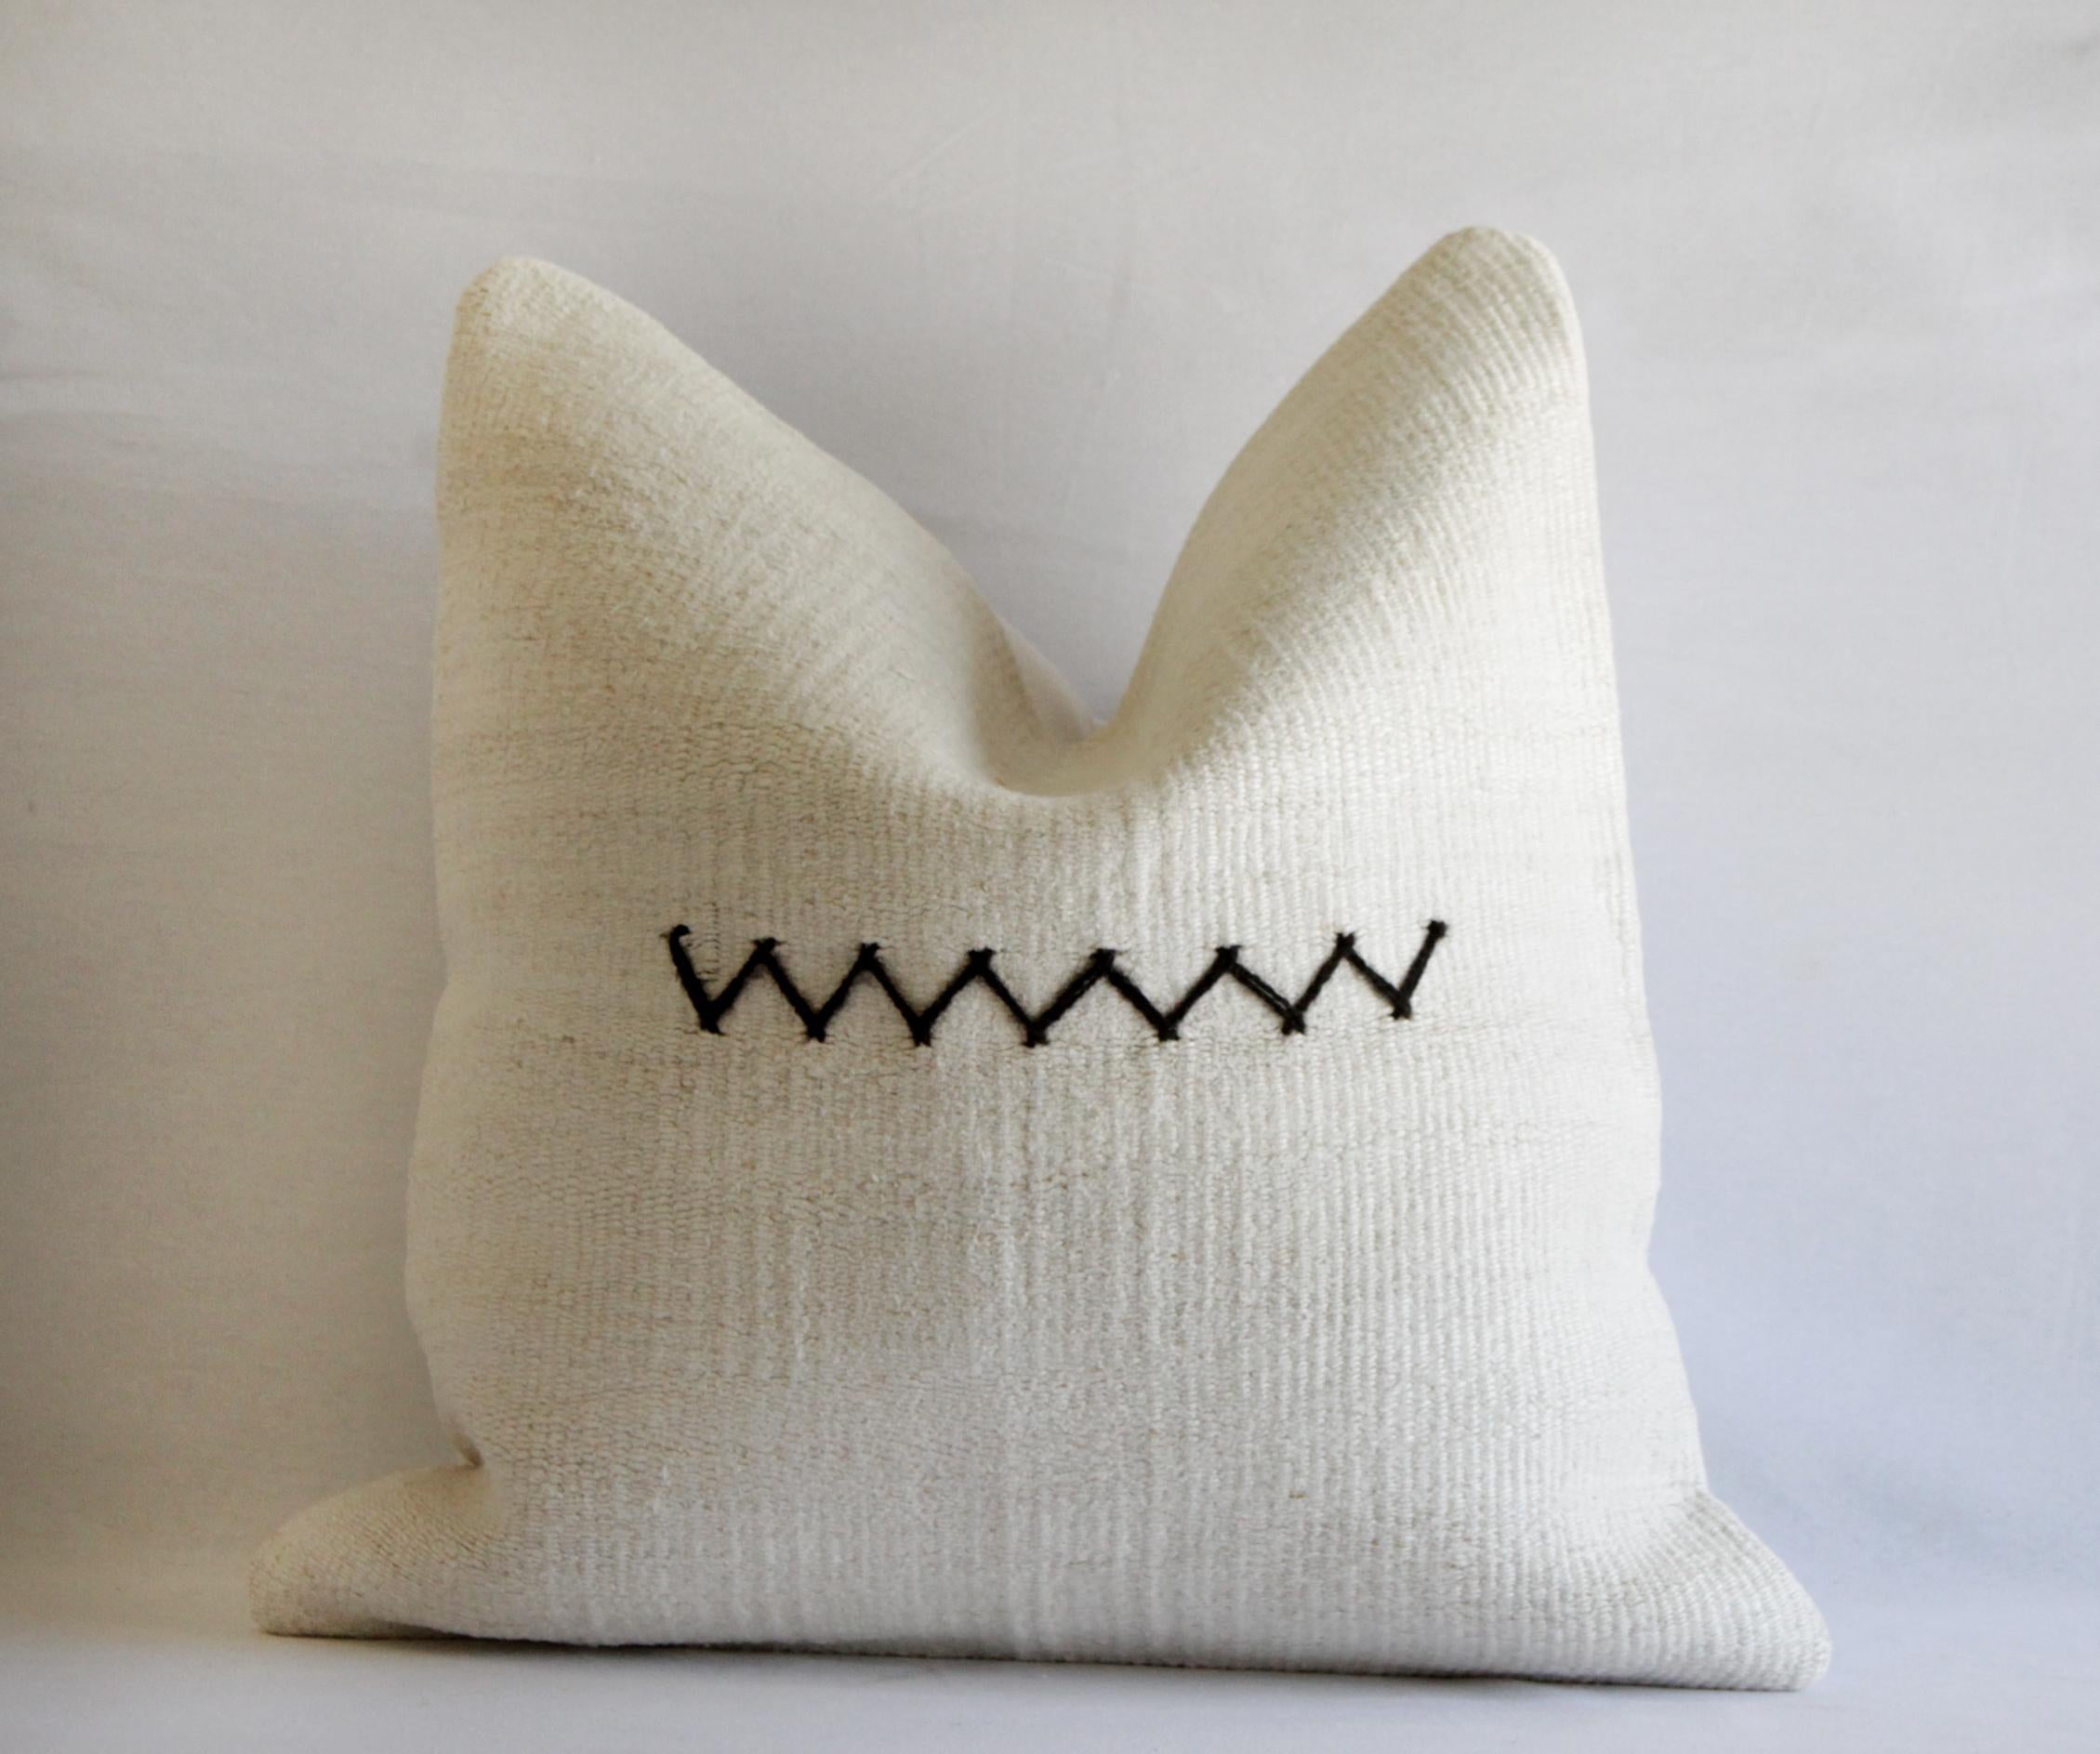 Vintage Hemp pillow with zig zag stitch
Off-white color, with coordinating brushed cotton backing, and hidden zipper closure. This pillow has a nice soft nubby texture.
2 available, sold separately.

Measures:
19.5